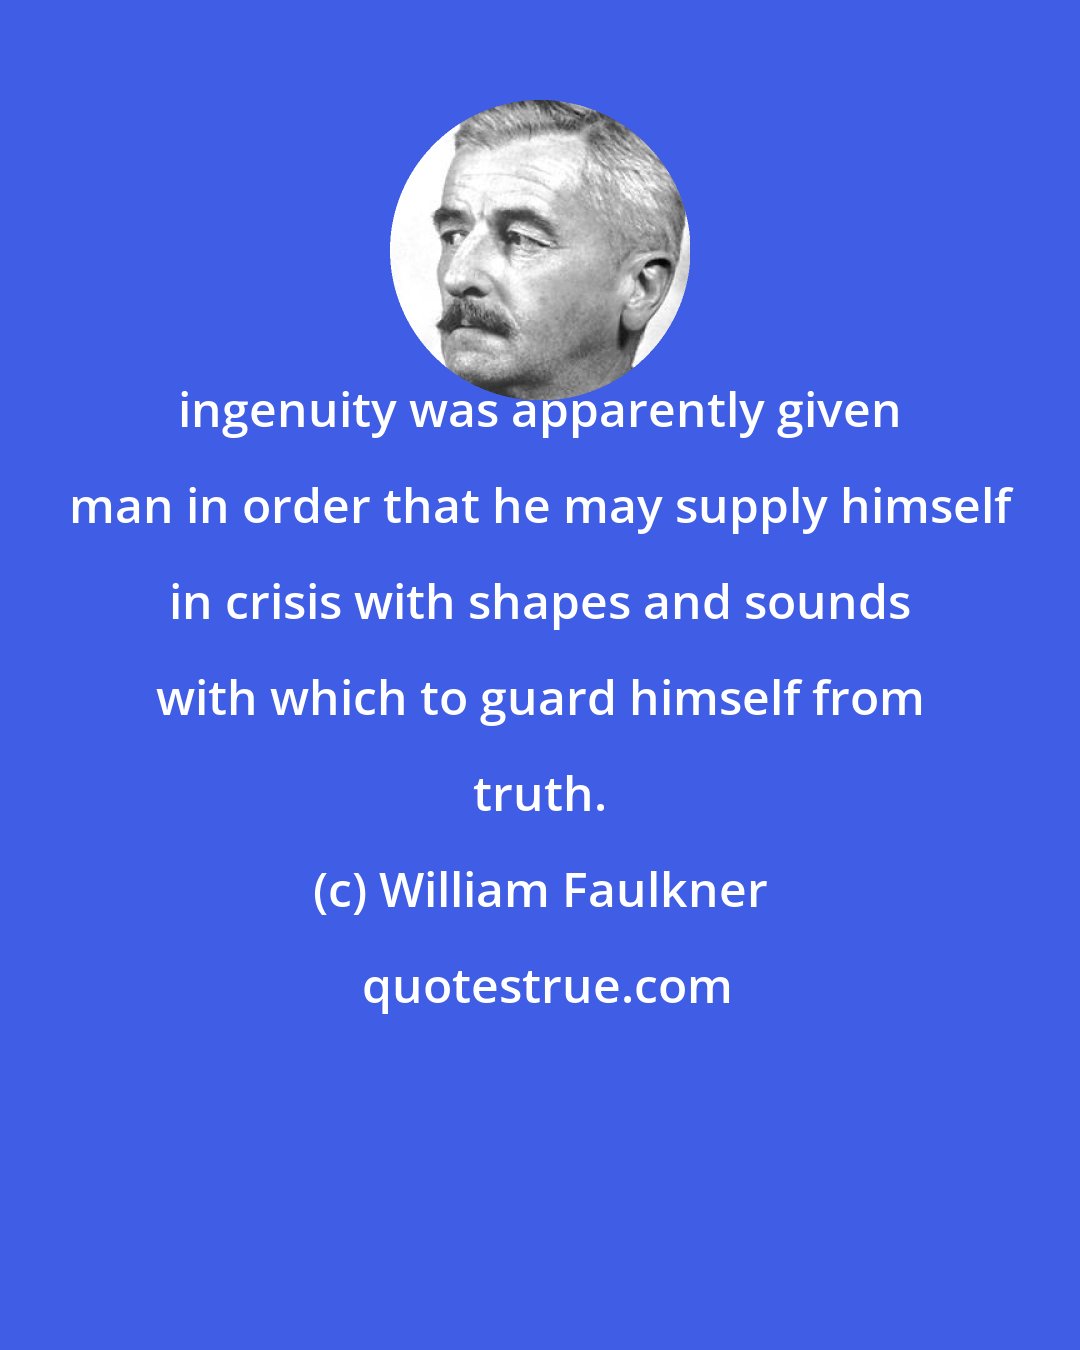 William Faulkner: ingenuity was apparently given man in order that he may supply himself in crisis with shapes and sounds with which to guard himself from truth.